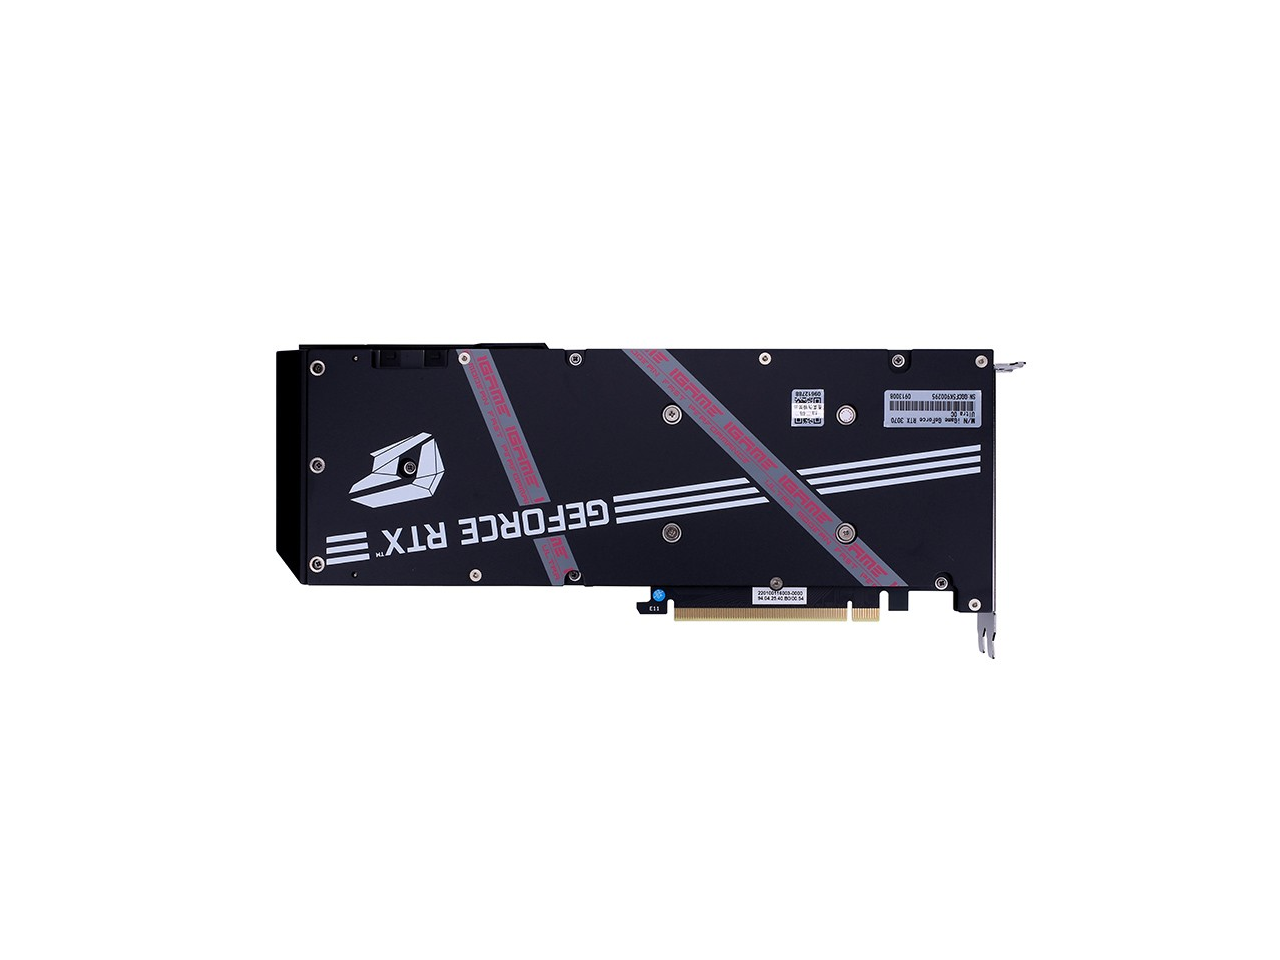 Colorful igame 3070. Colorful IGAME GEFORCE RTX 3080 Ultra OC 10g-v 10gb. RTX 3070 IGAME. RTX 3070 colorful. GEFORCE RTX 3070 Ultra w OC 8g.